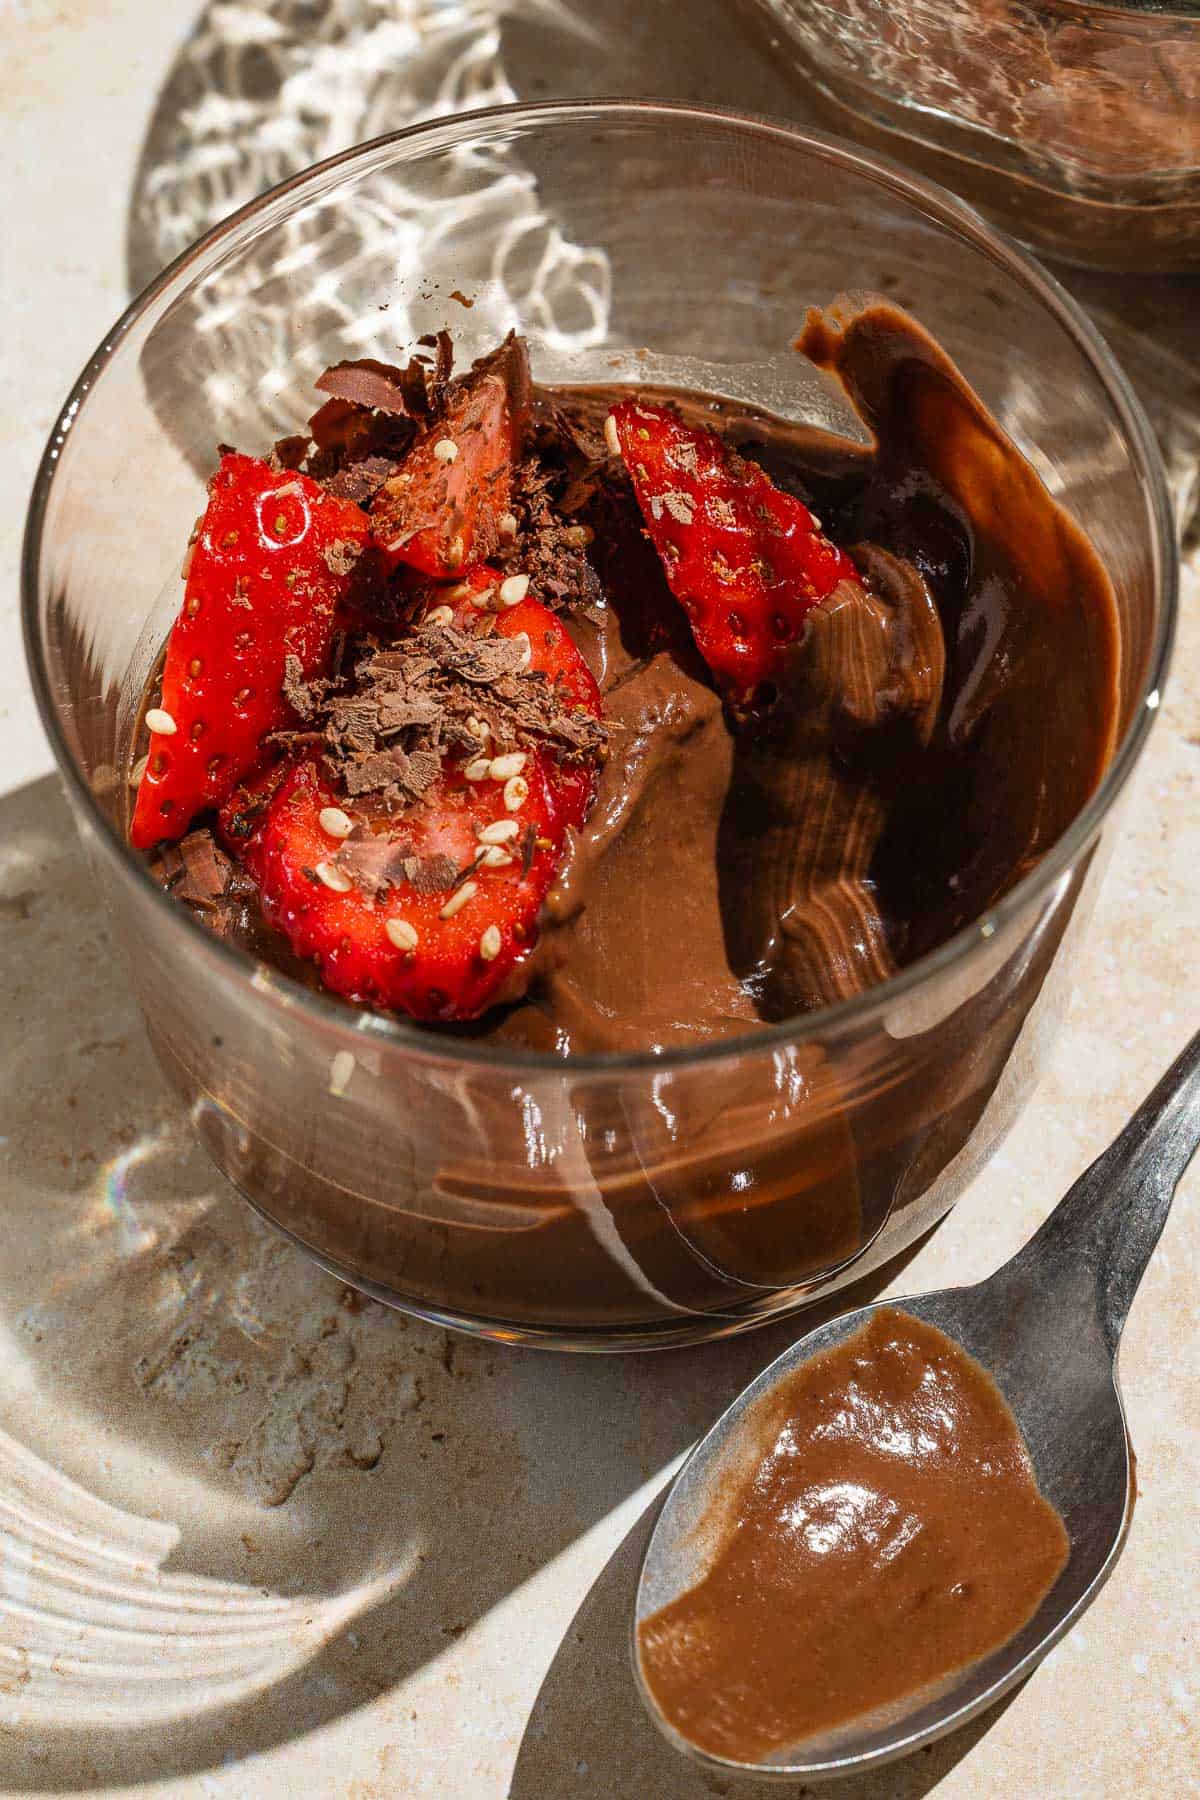 A close up of a bowl of vegan chocolate pudding garnished with sliced fresh strawberries with a spoon next to it.